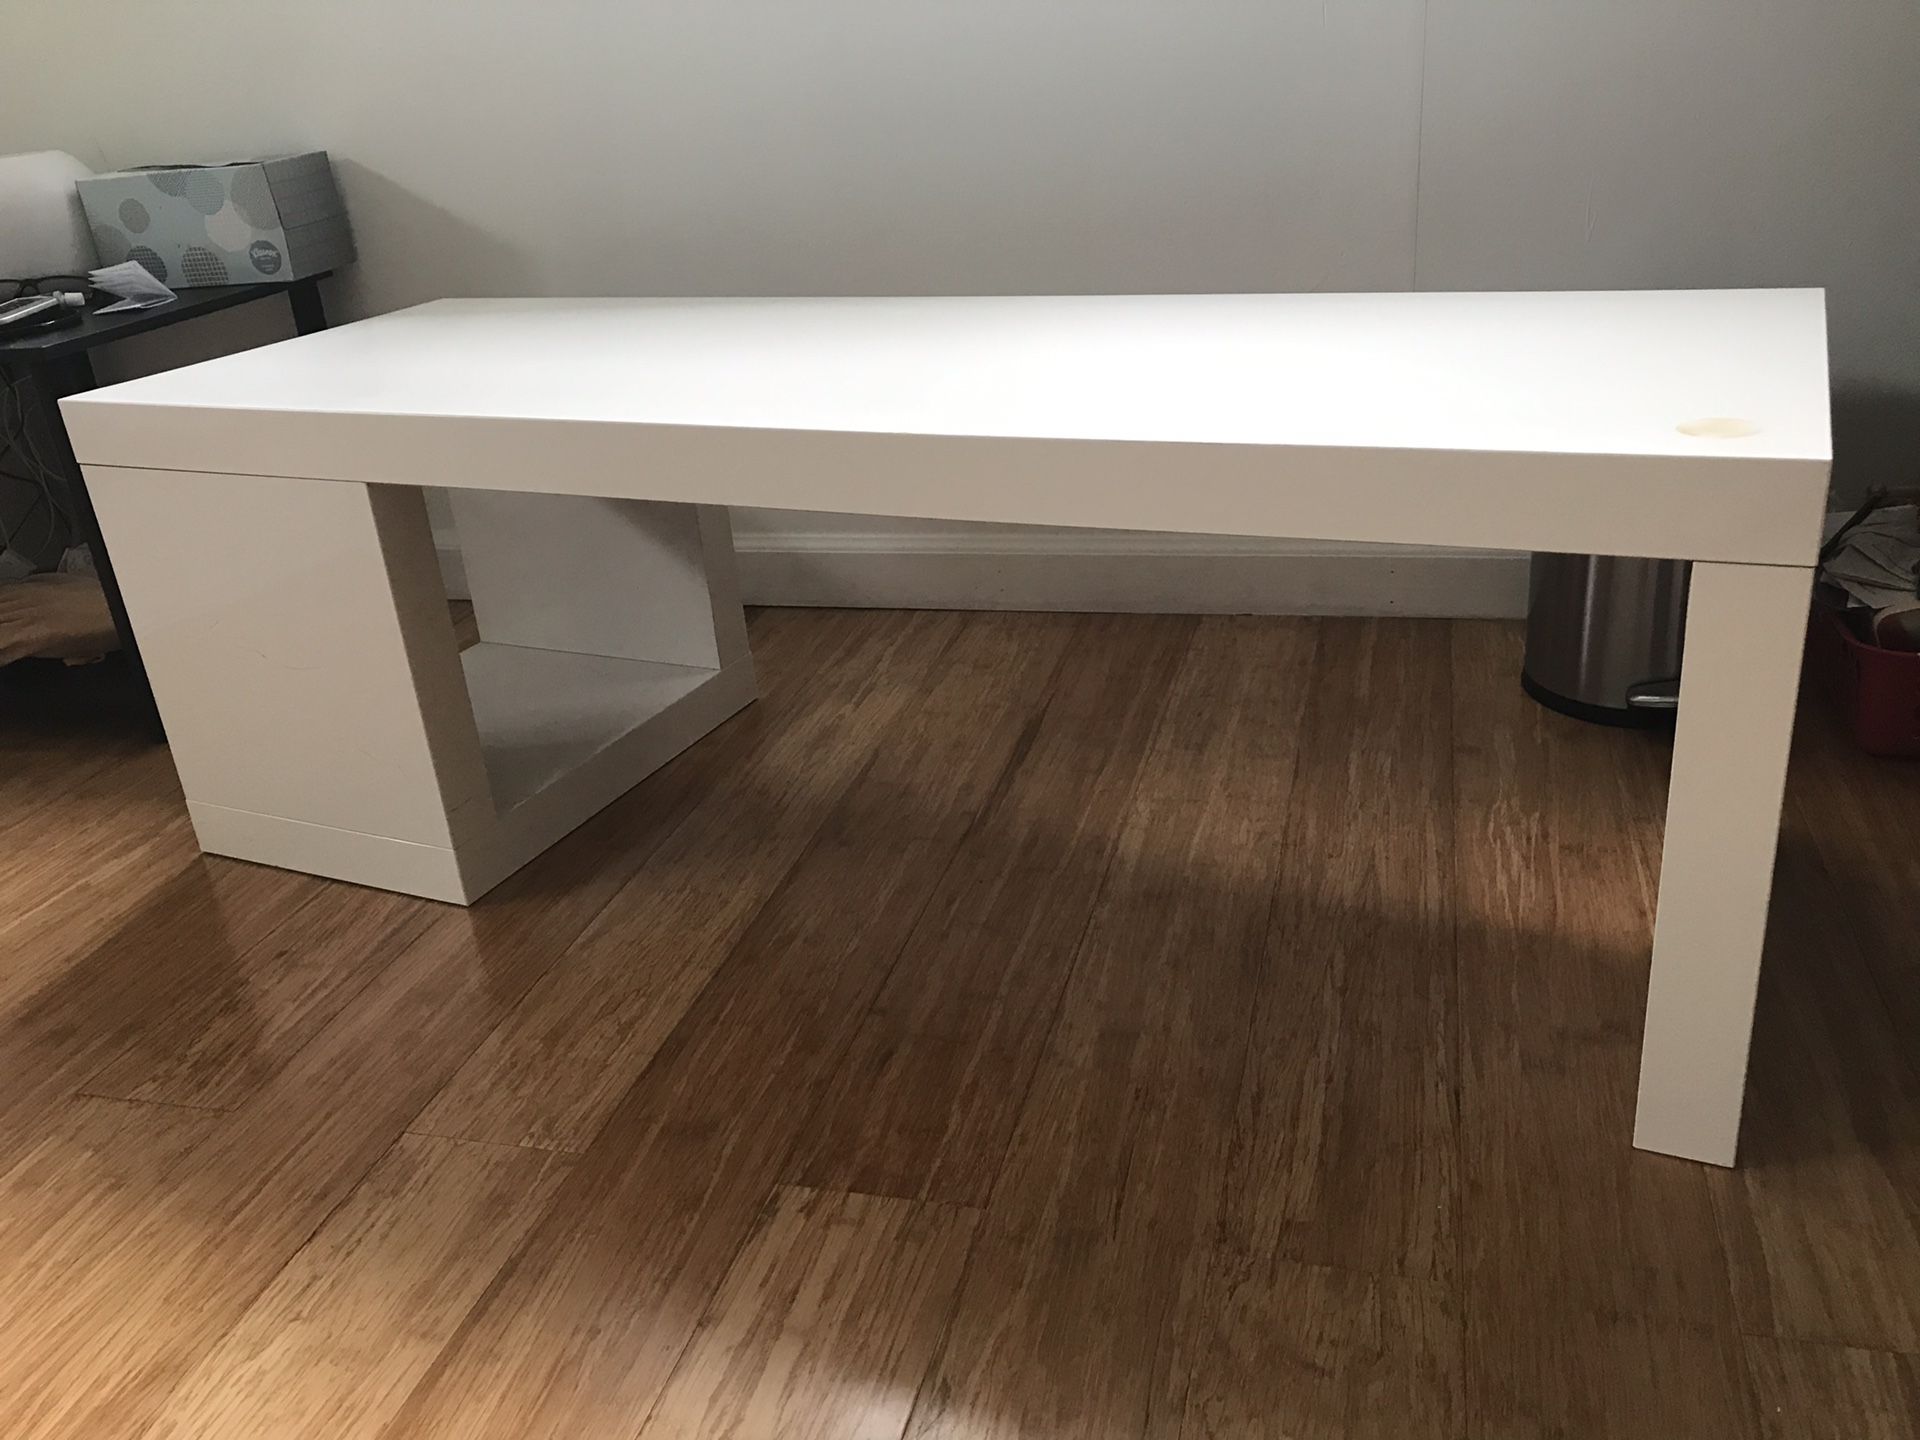 Table or desk or stand